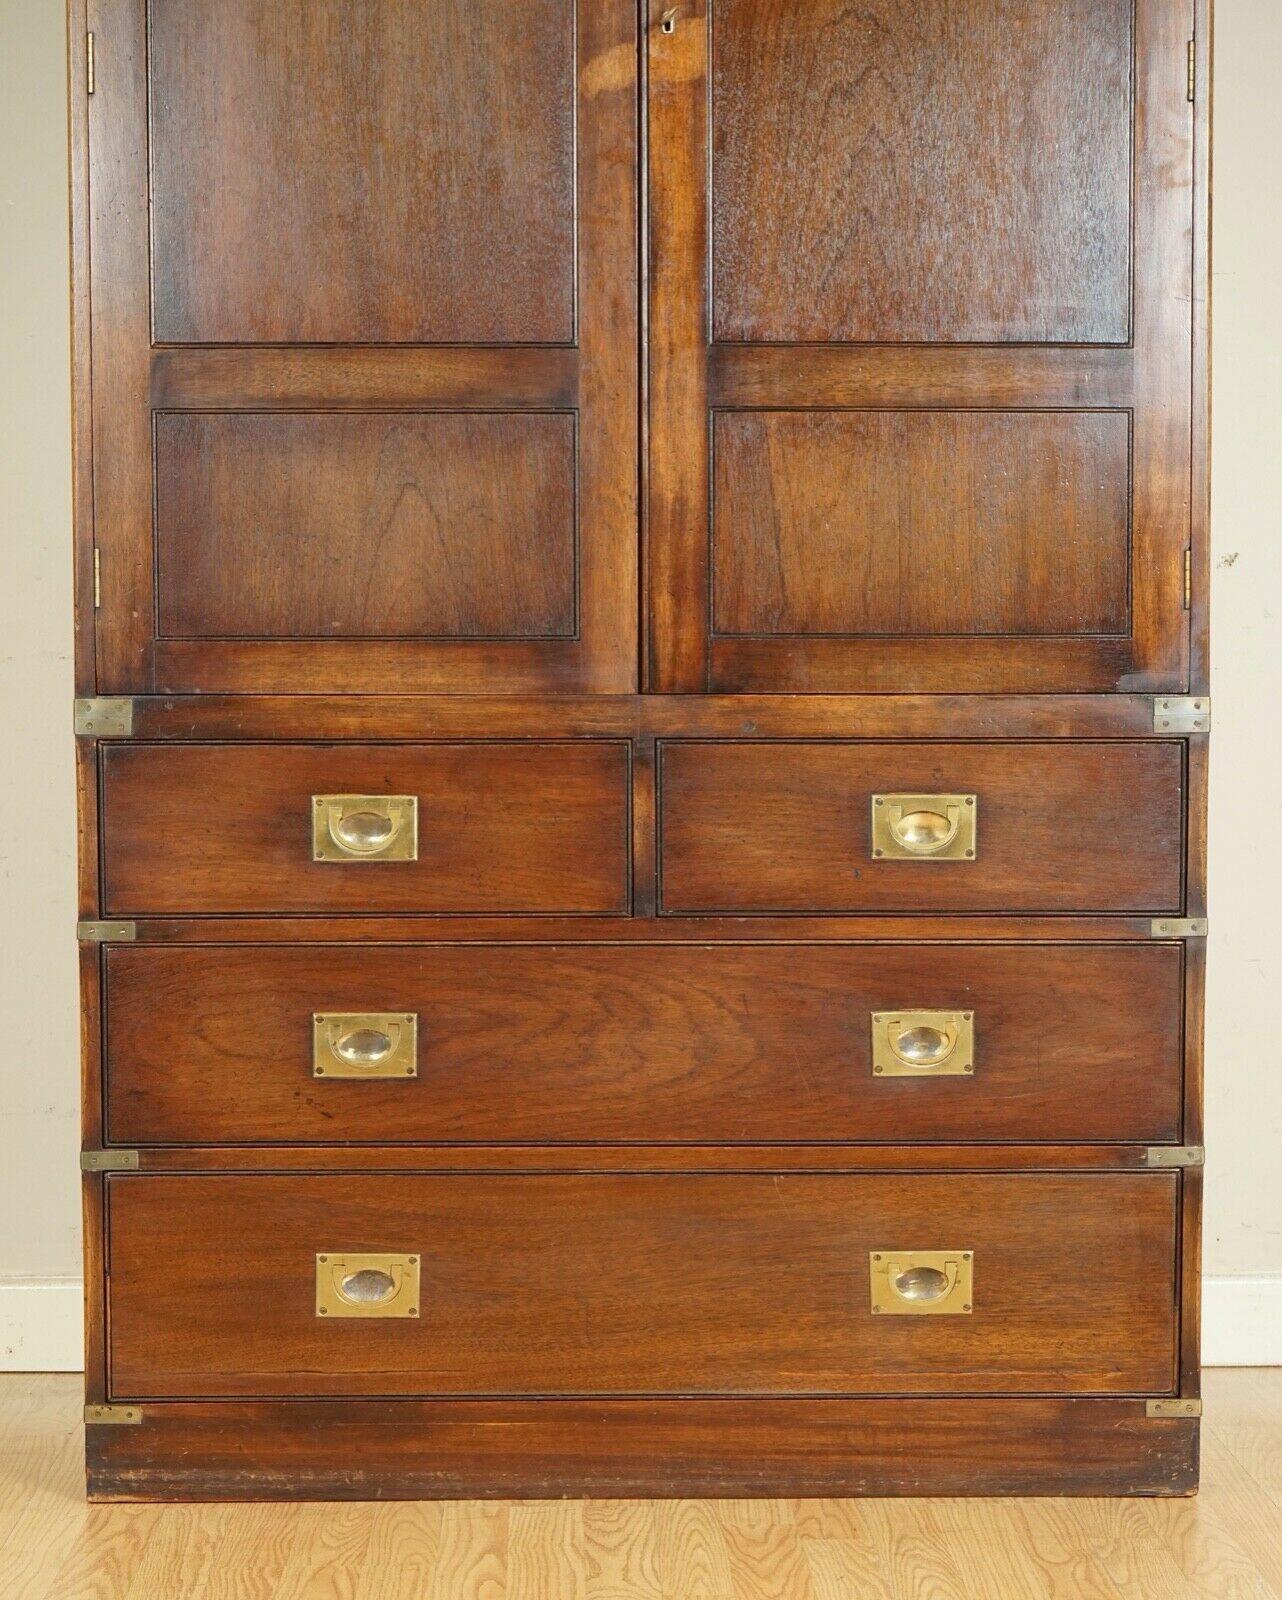 Hand-Crafted Stunning Bevan and Funnel Military Campaign Wardrobe/Cabinet with Brass Handles